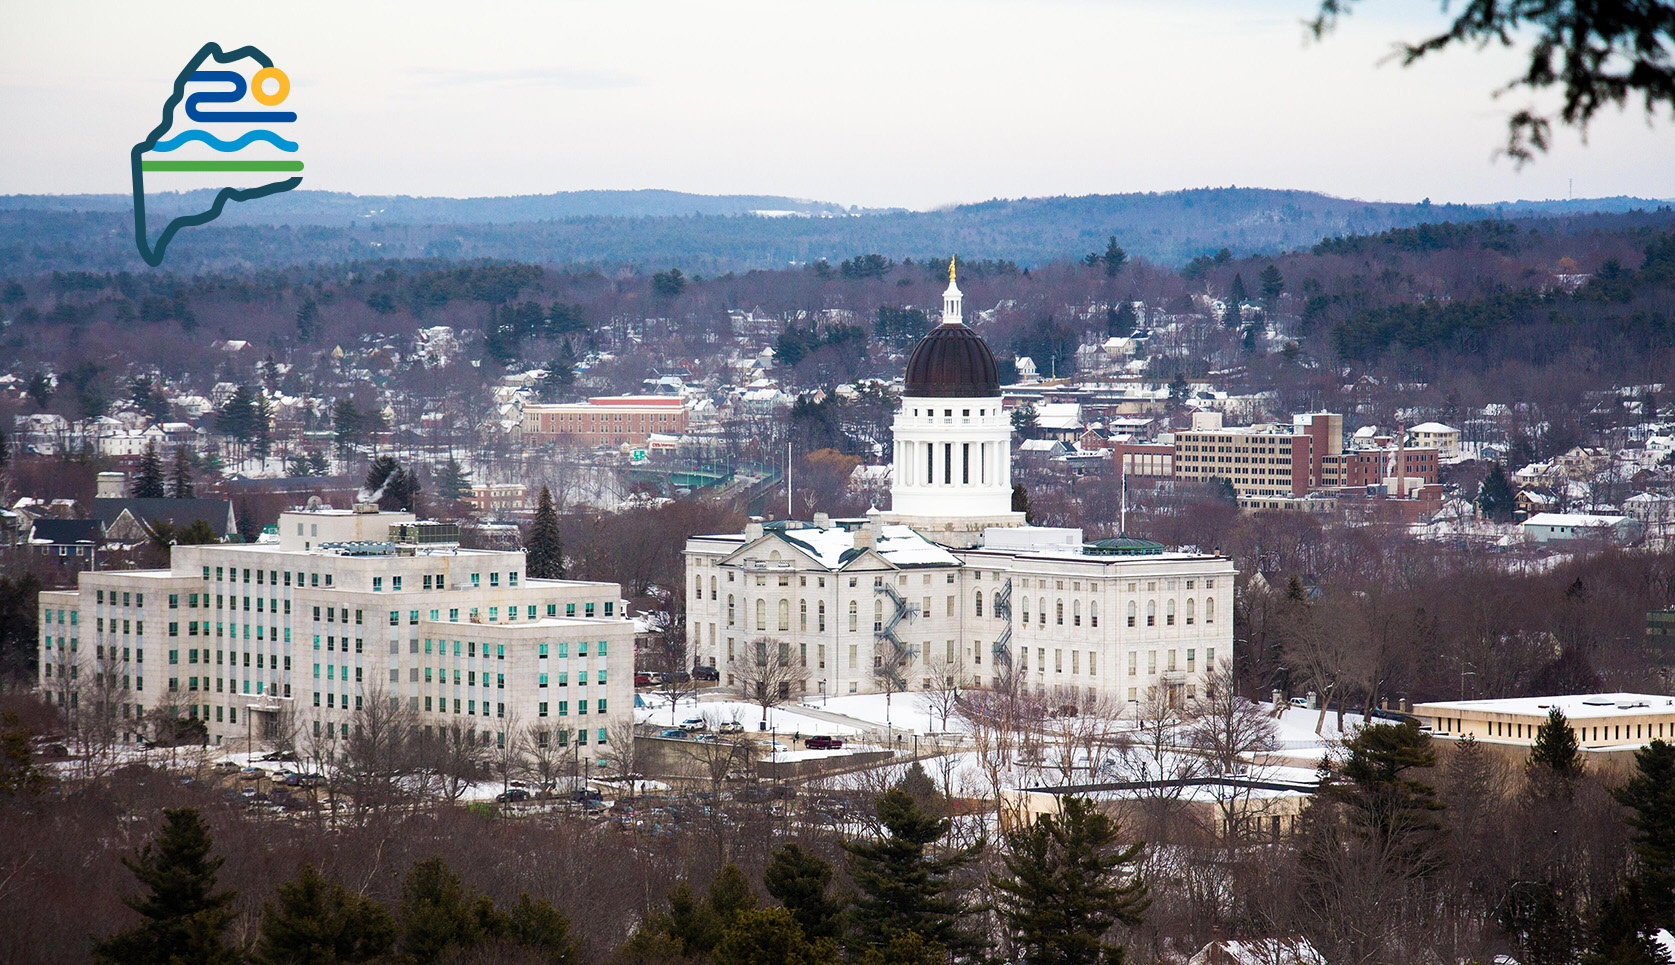 A view of the Maine statehouse from a surrounding hill.